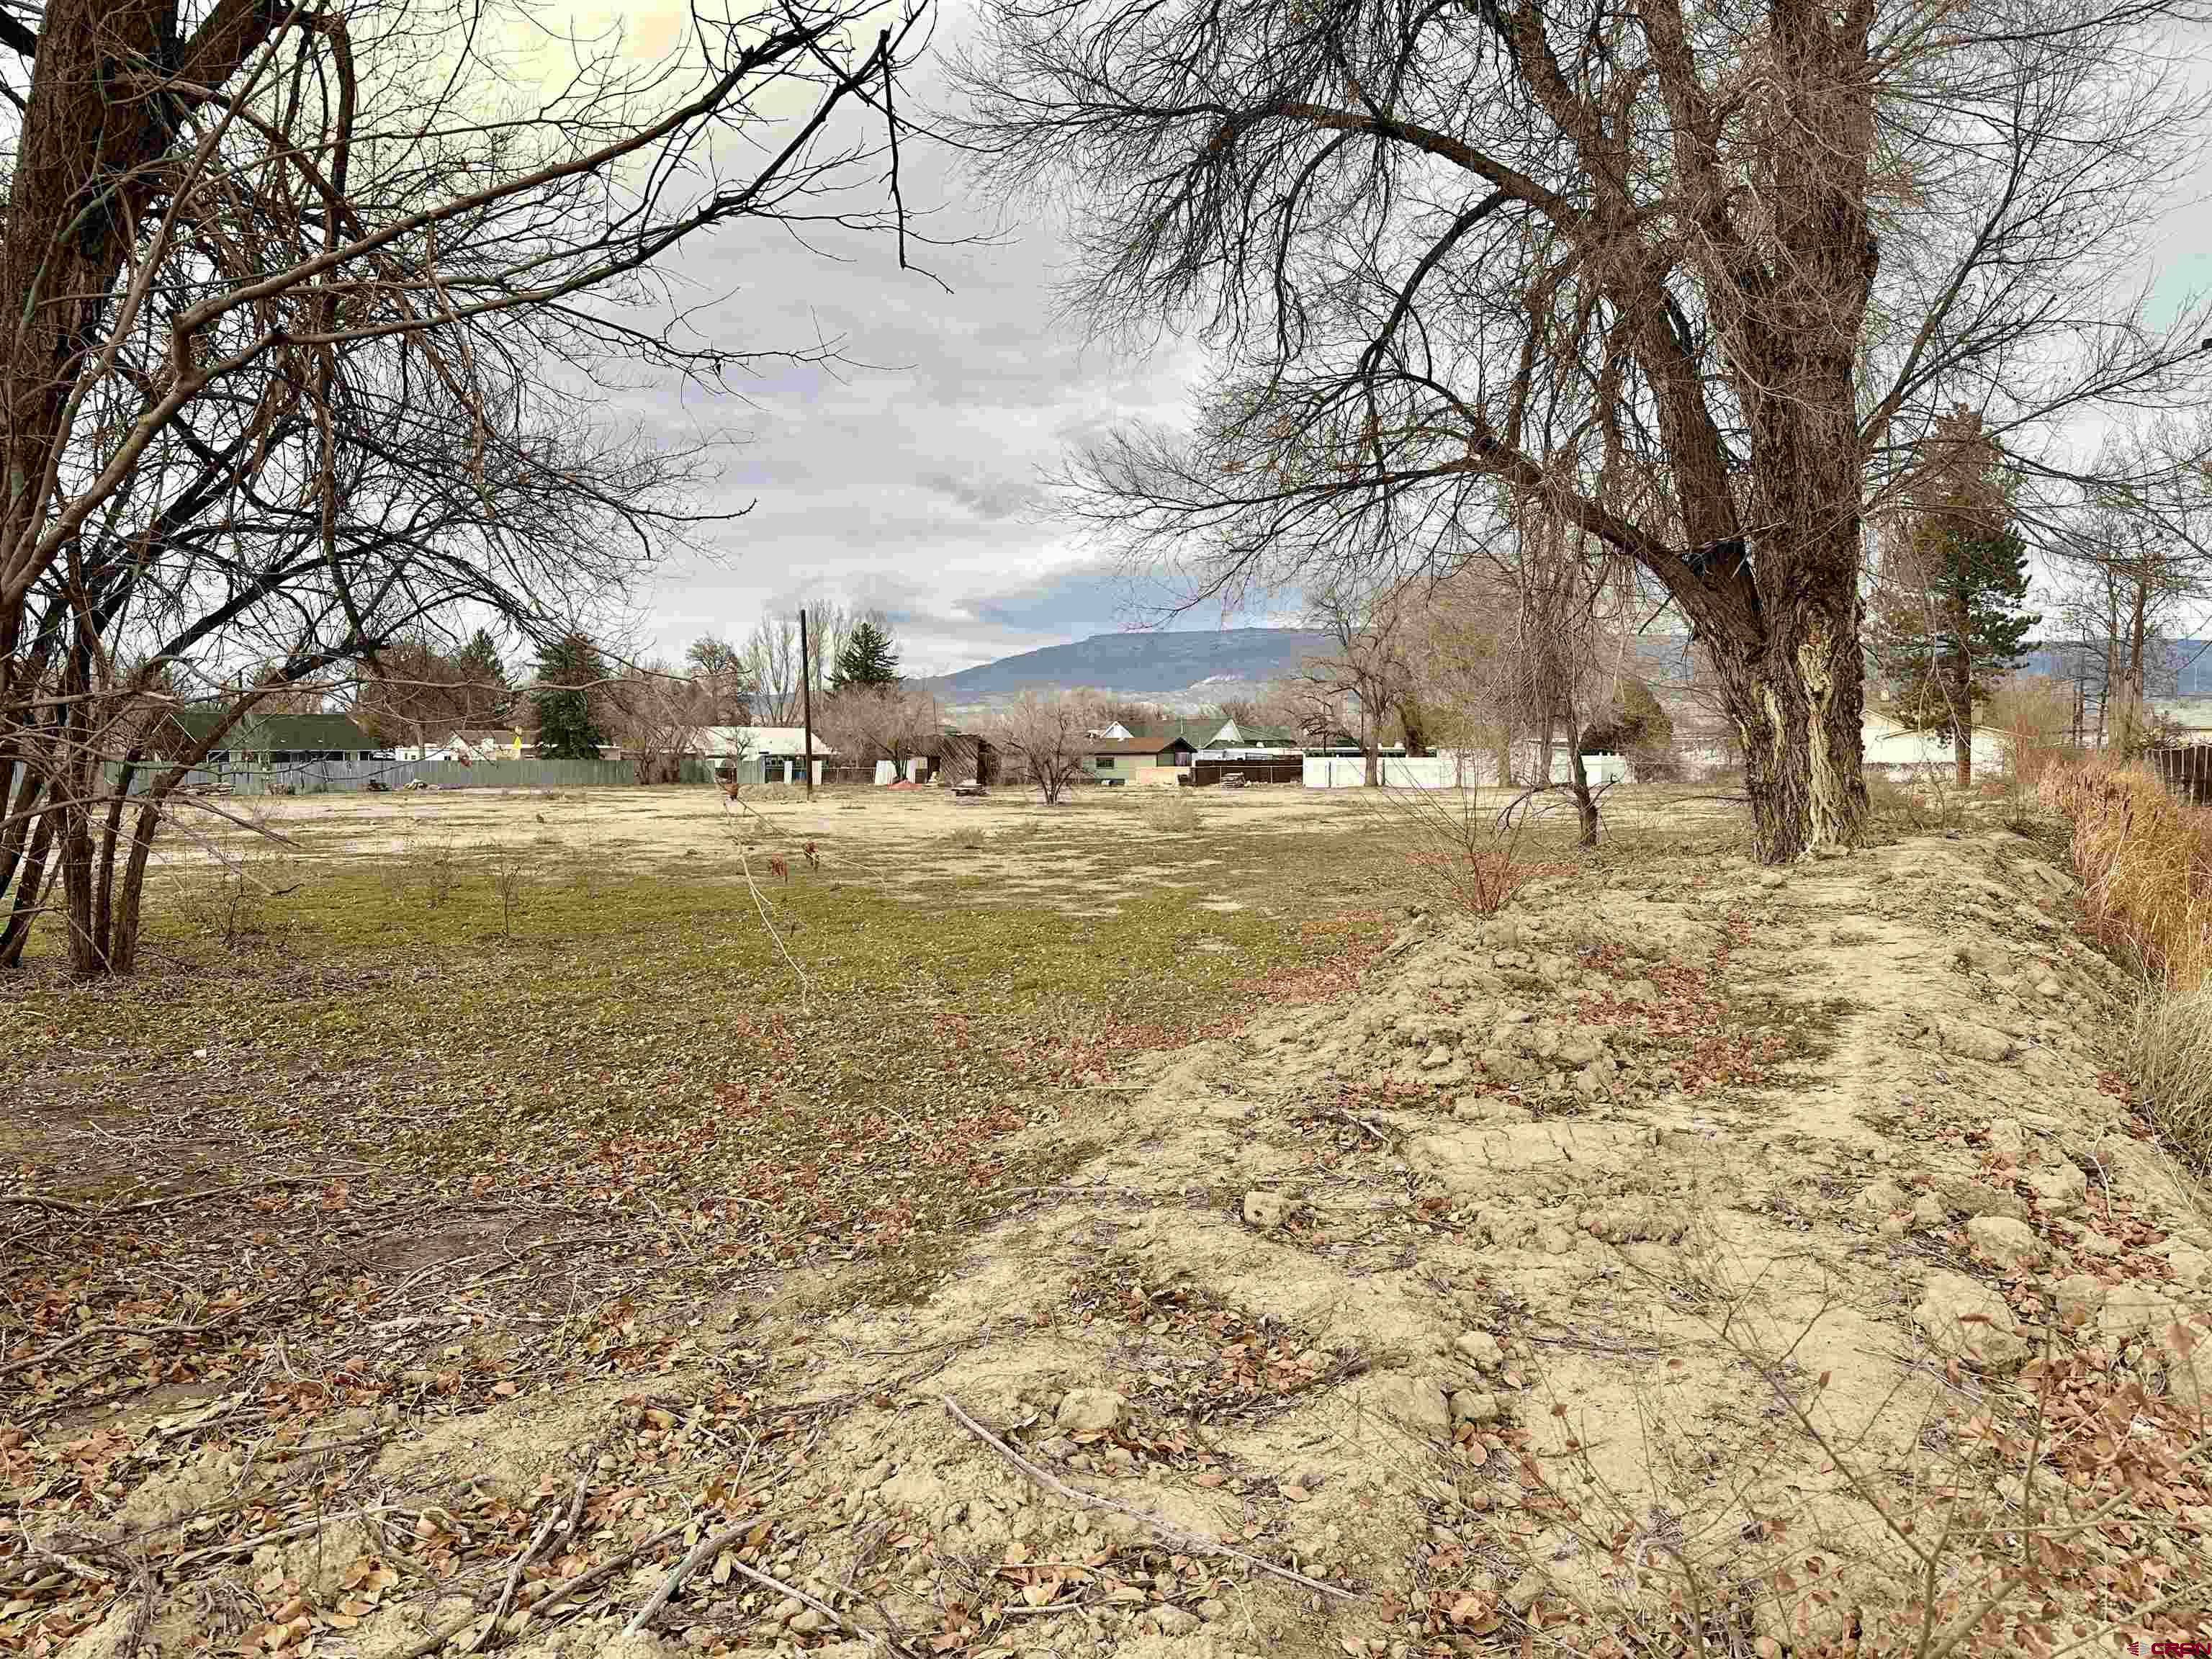 Come take a look at this property that features TWO lots- use them together or separately. At just shy of 1 acre each, these lots would make excellent building sites for either a single family home or a duplex. Zoning is R-2. This property also comes with a City of Delta water tap. Beautiful views of the Grand Mesa! The property is also fully fenced and has 1.8 shares of UVWUA irrigation water. Sitting atop Garnet Mesa, this is an excellent location for those looking to be close to the schools, hospital, and the amenities of town. Come check it out!